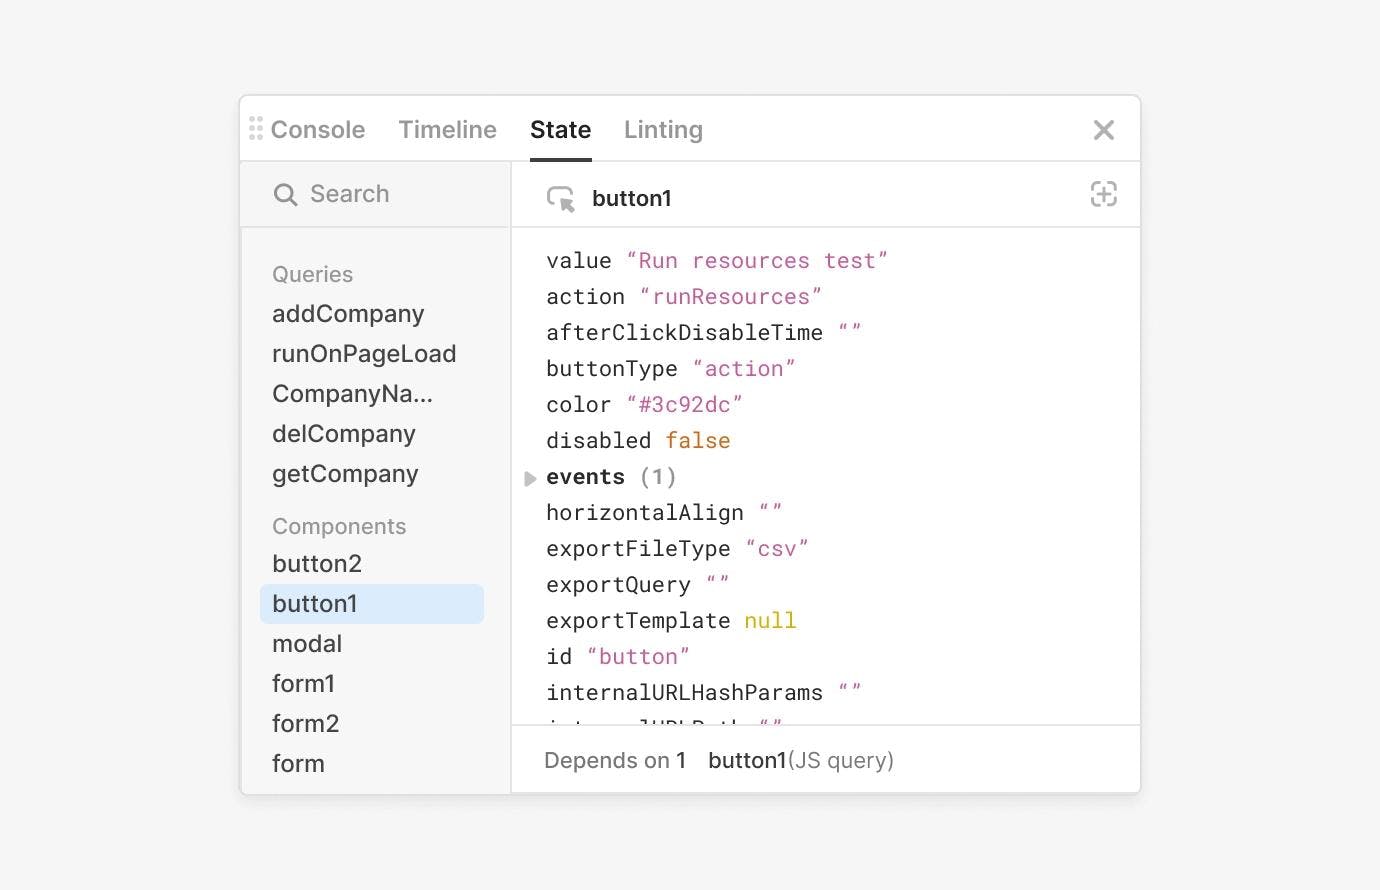 State tab provides a list of queries, components, and global variables used in your app